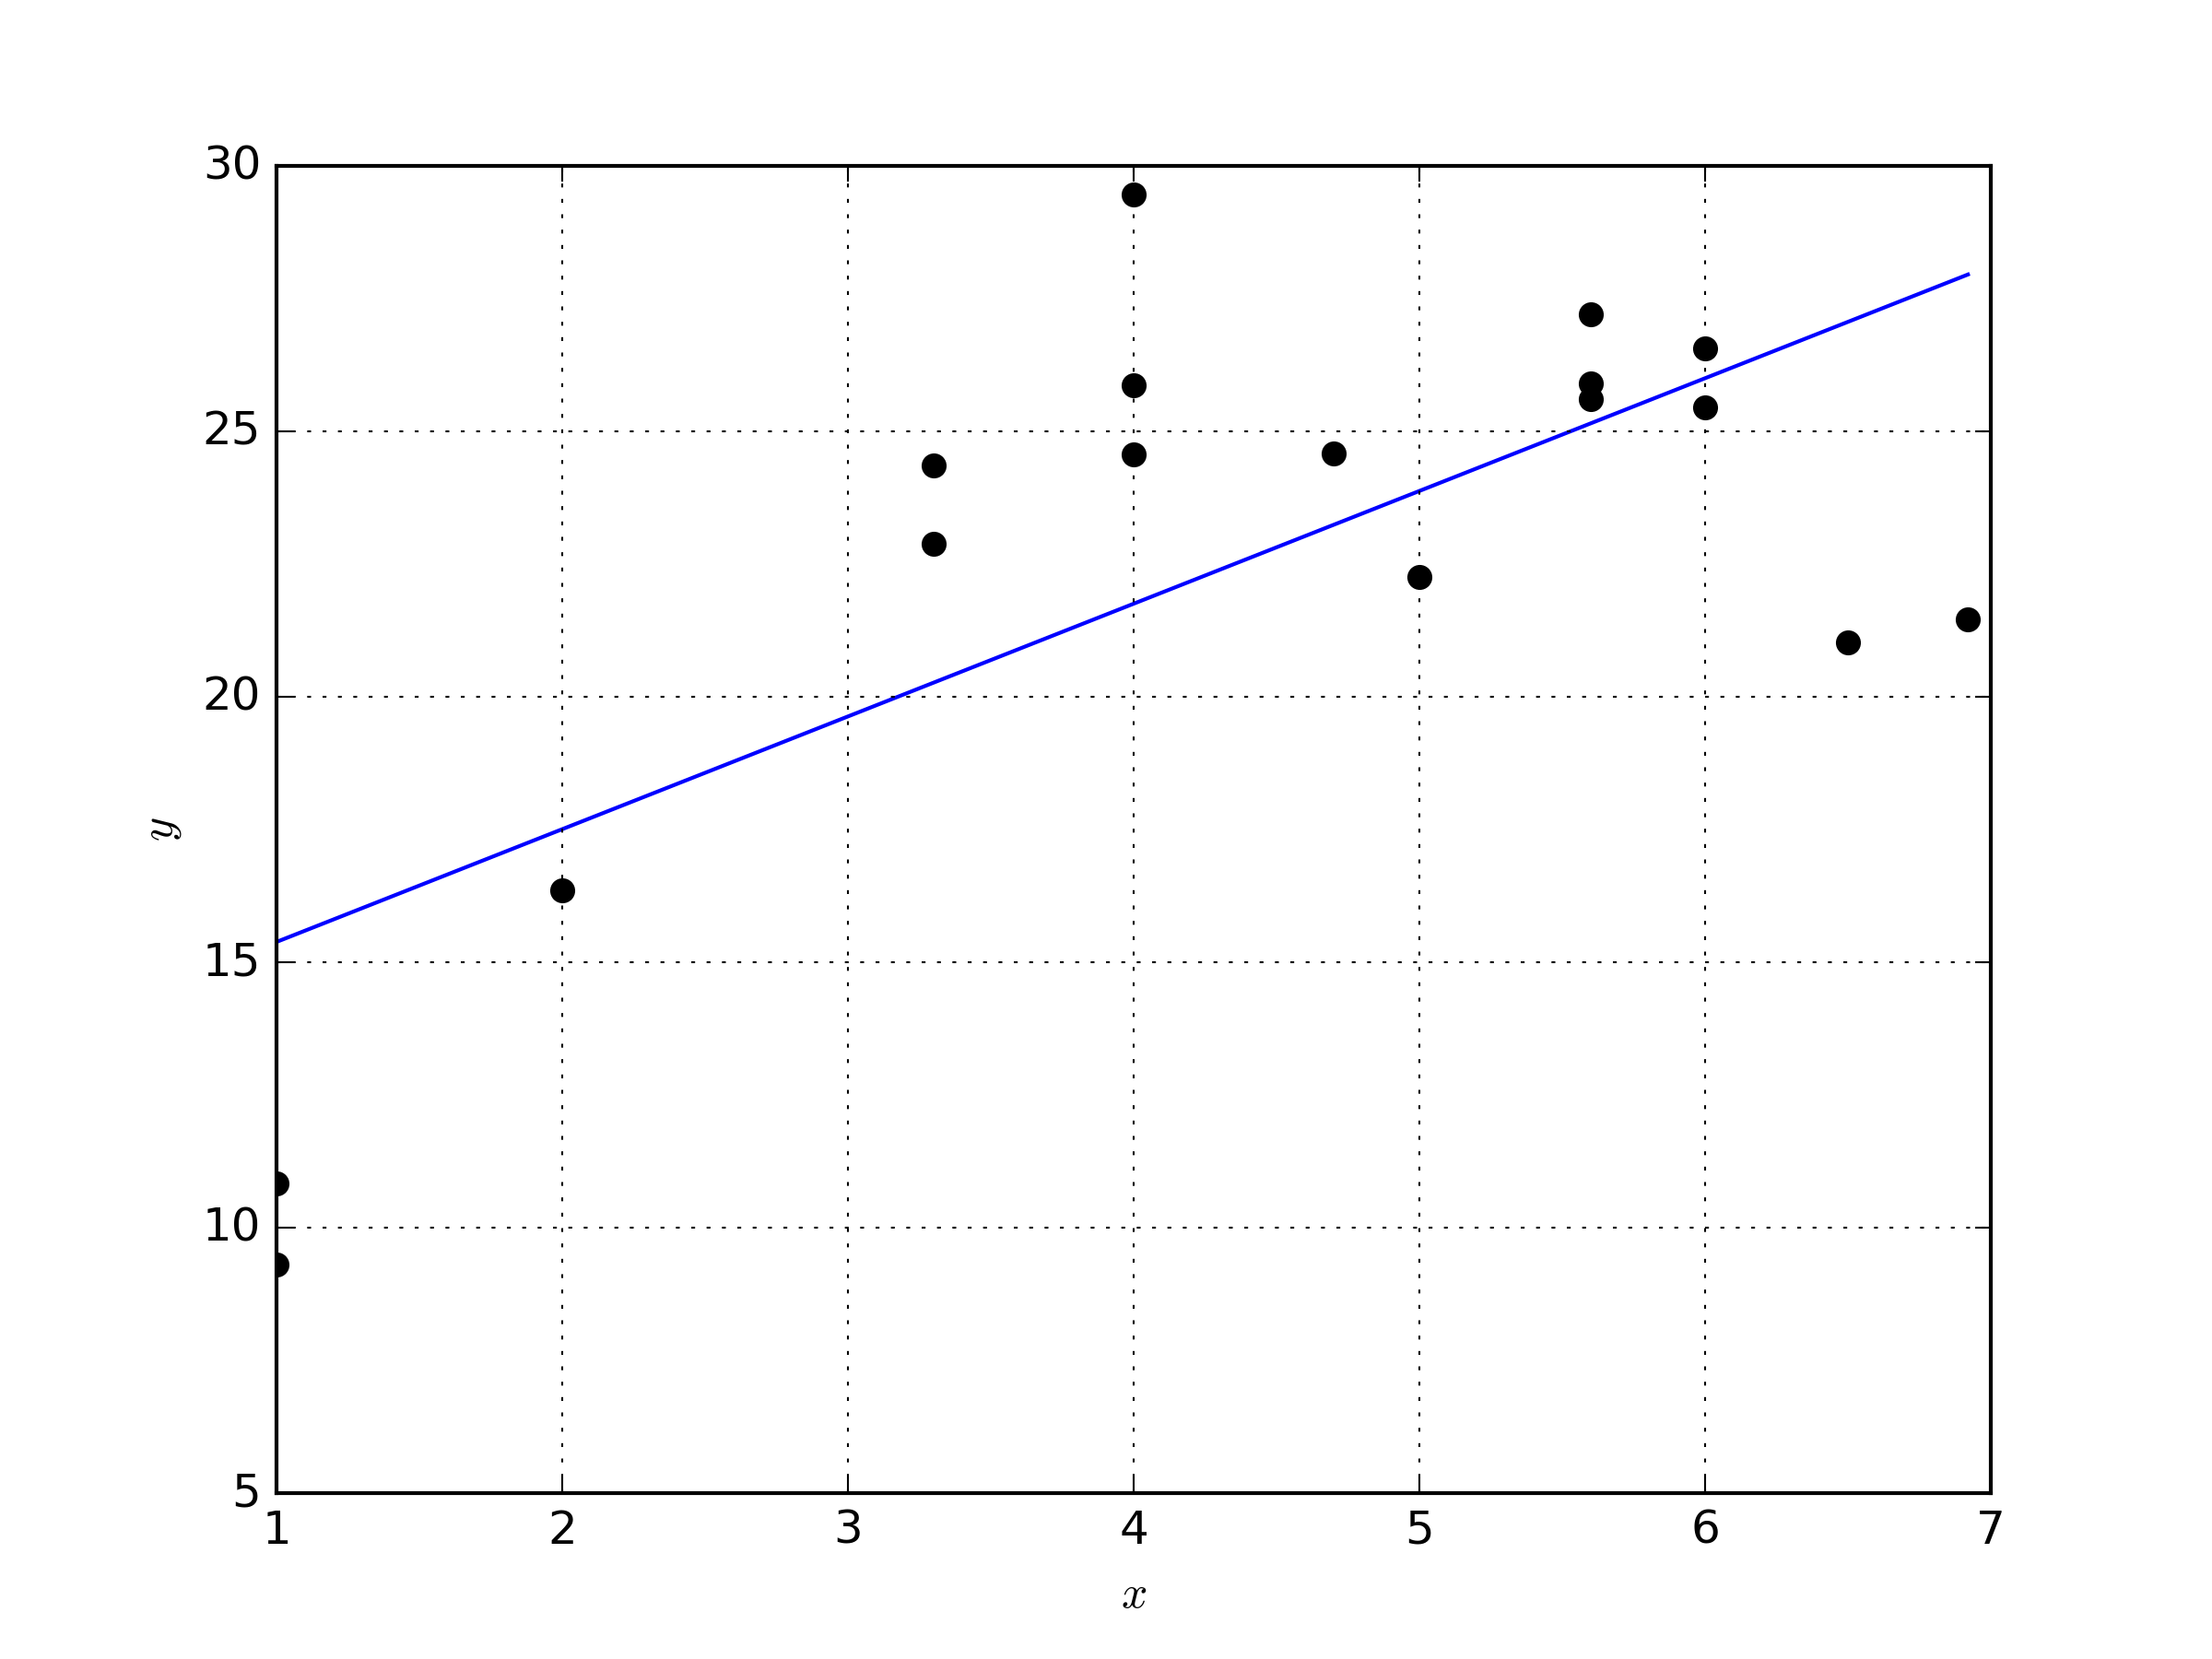 A linear model is fit to the data set.